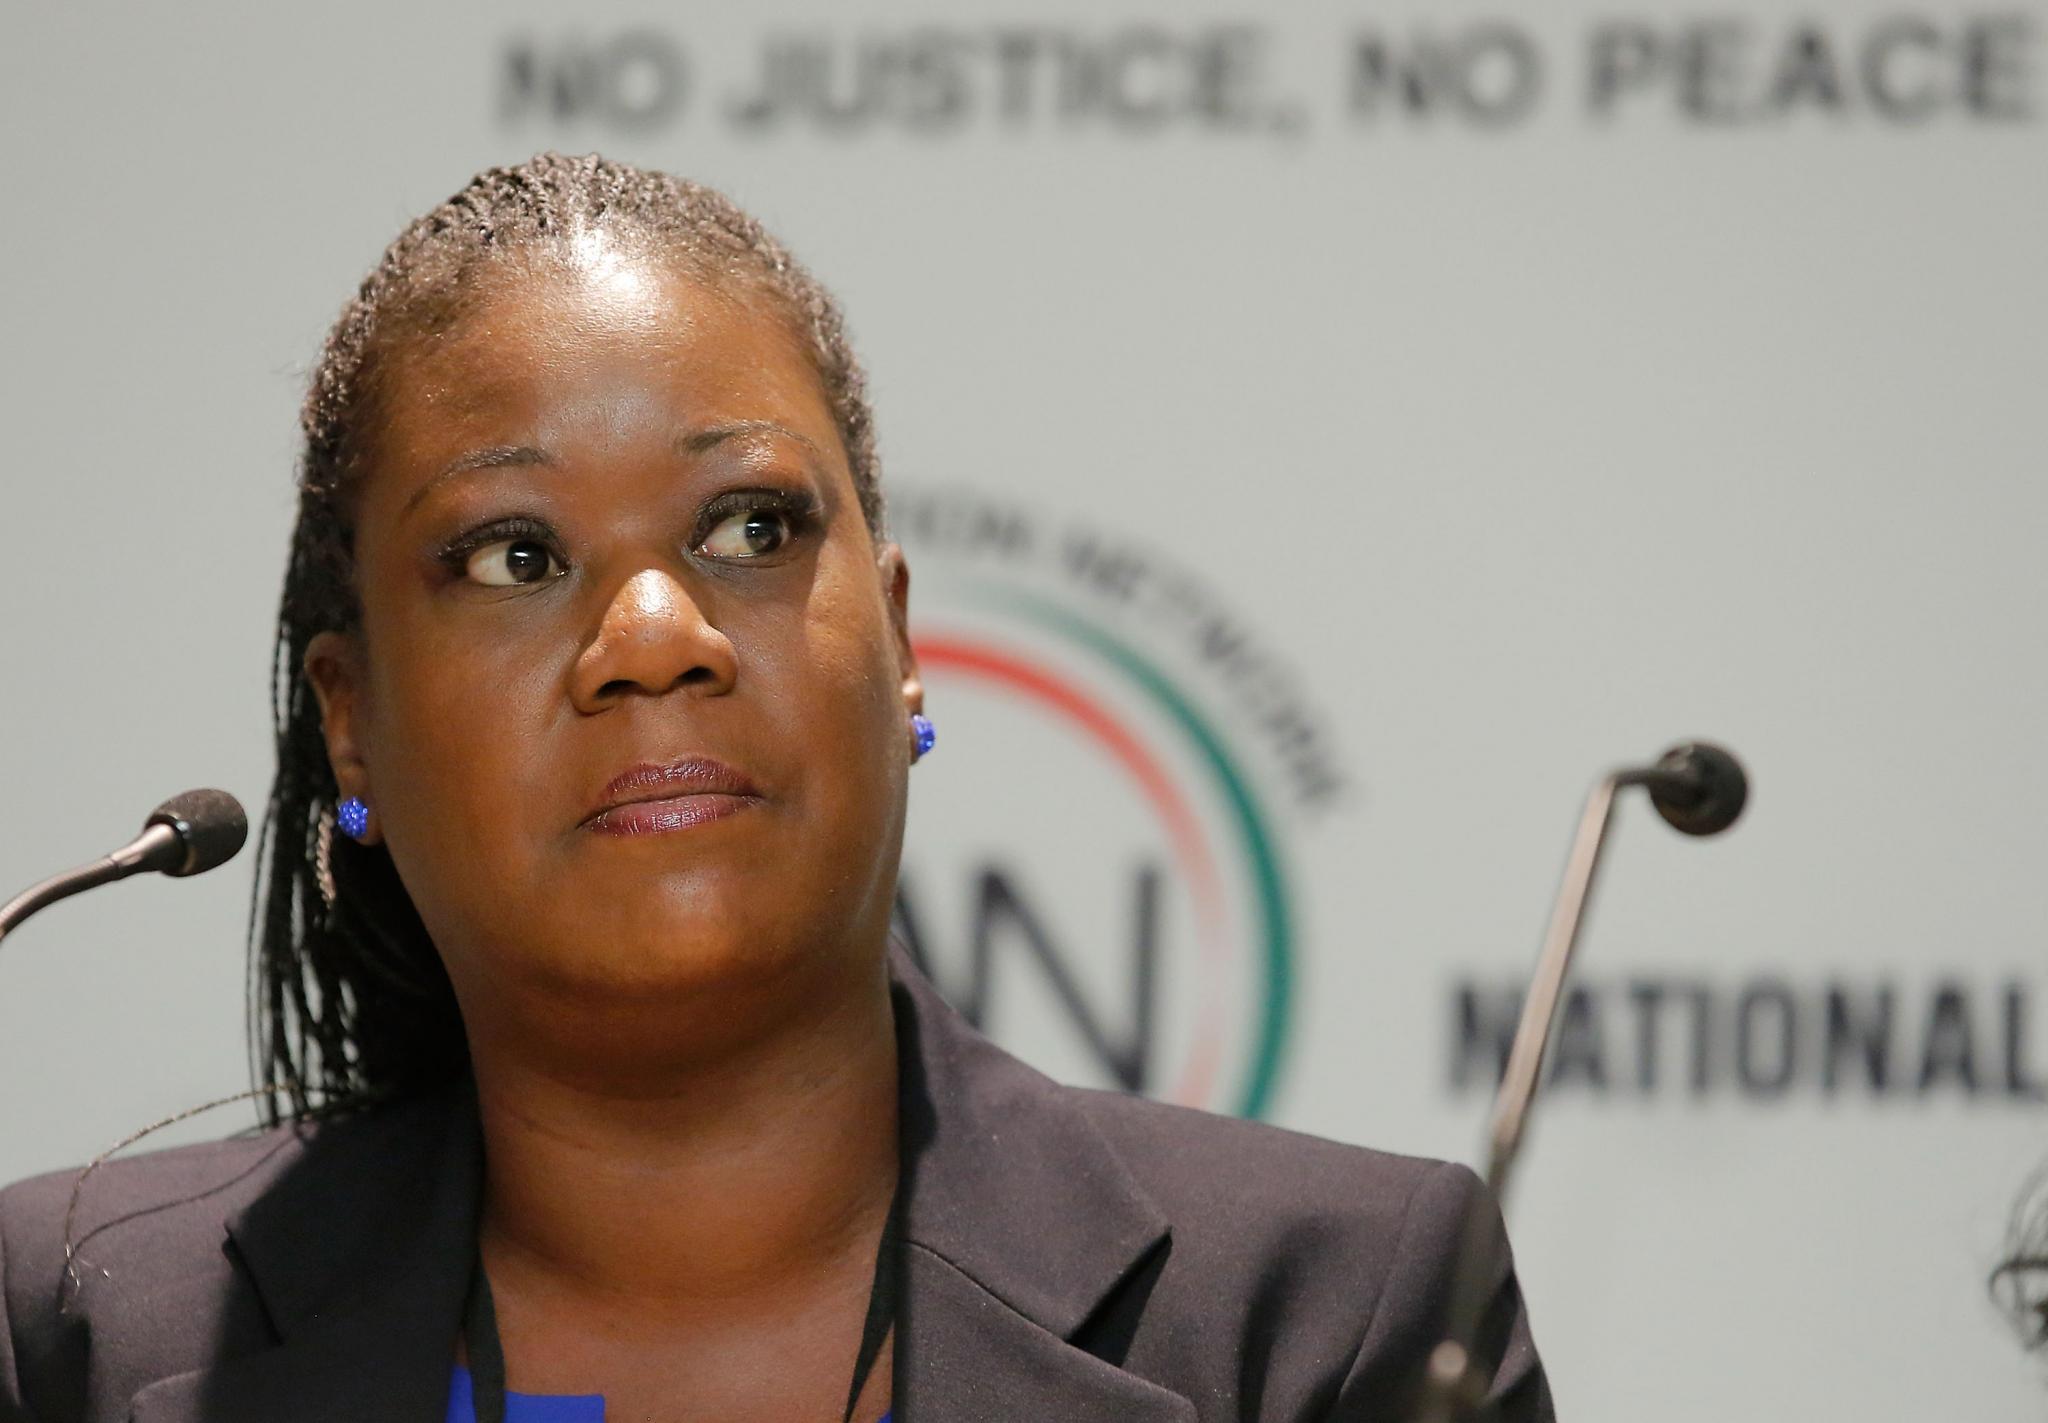 #WEW: Sybrina Fulton Continues to Be the Voice of the Voiceless Years After Her Son’s Death